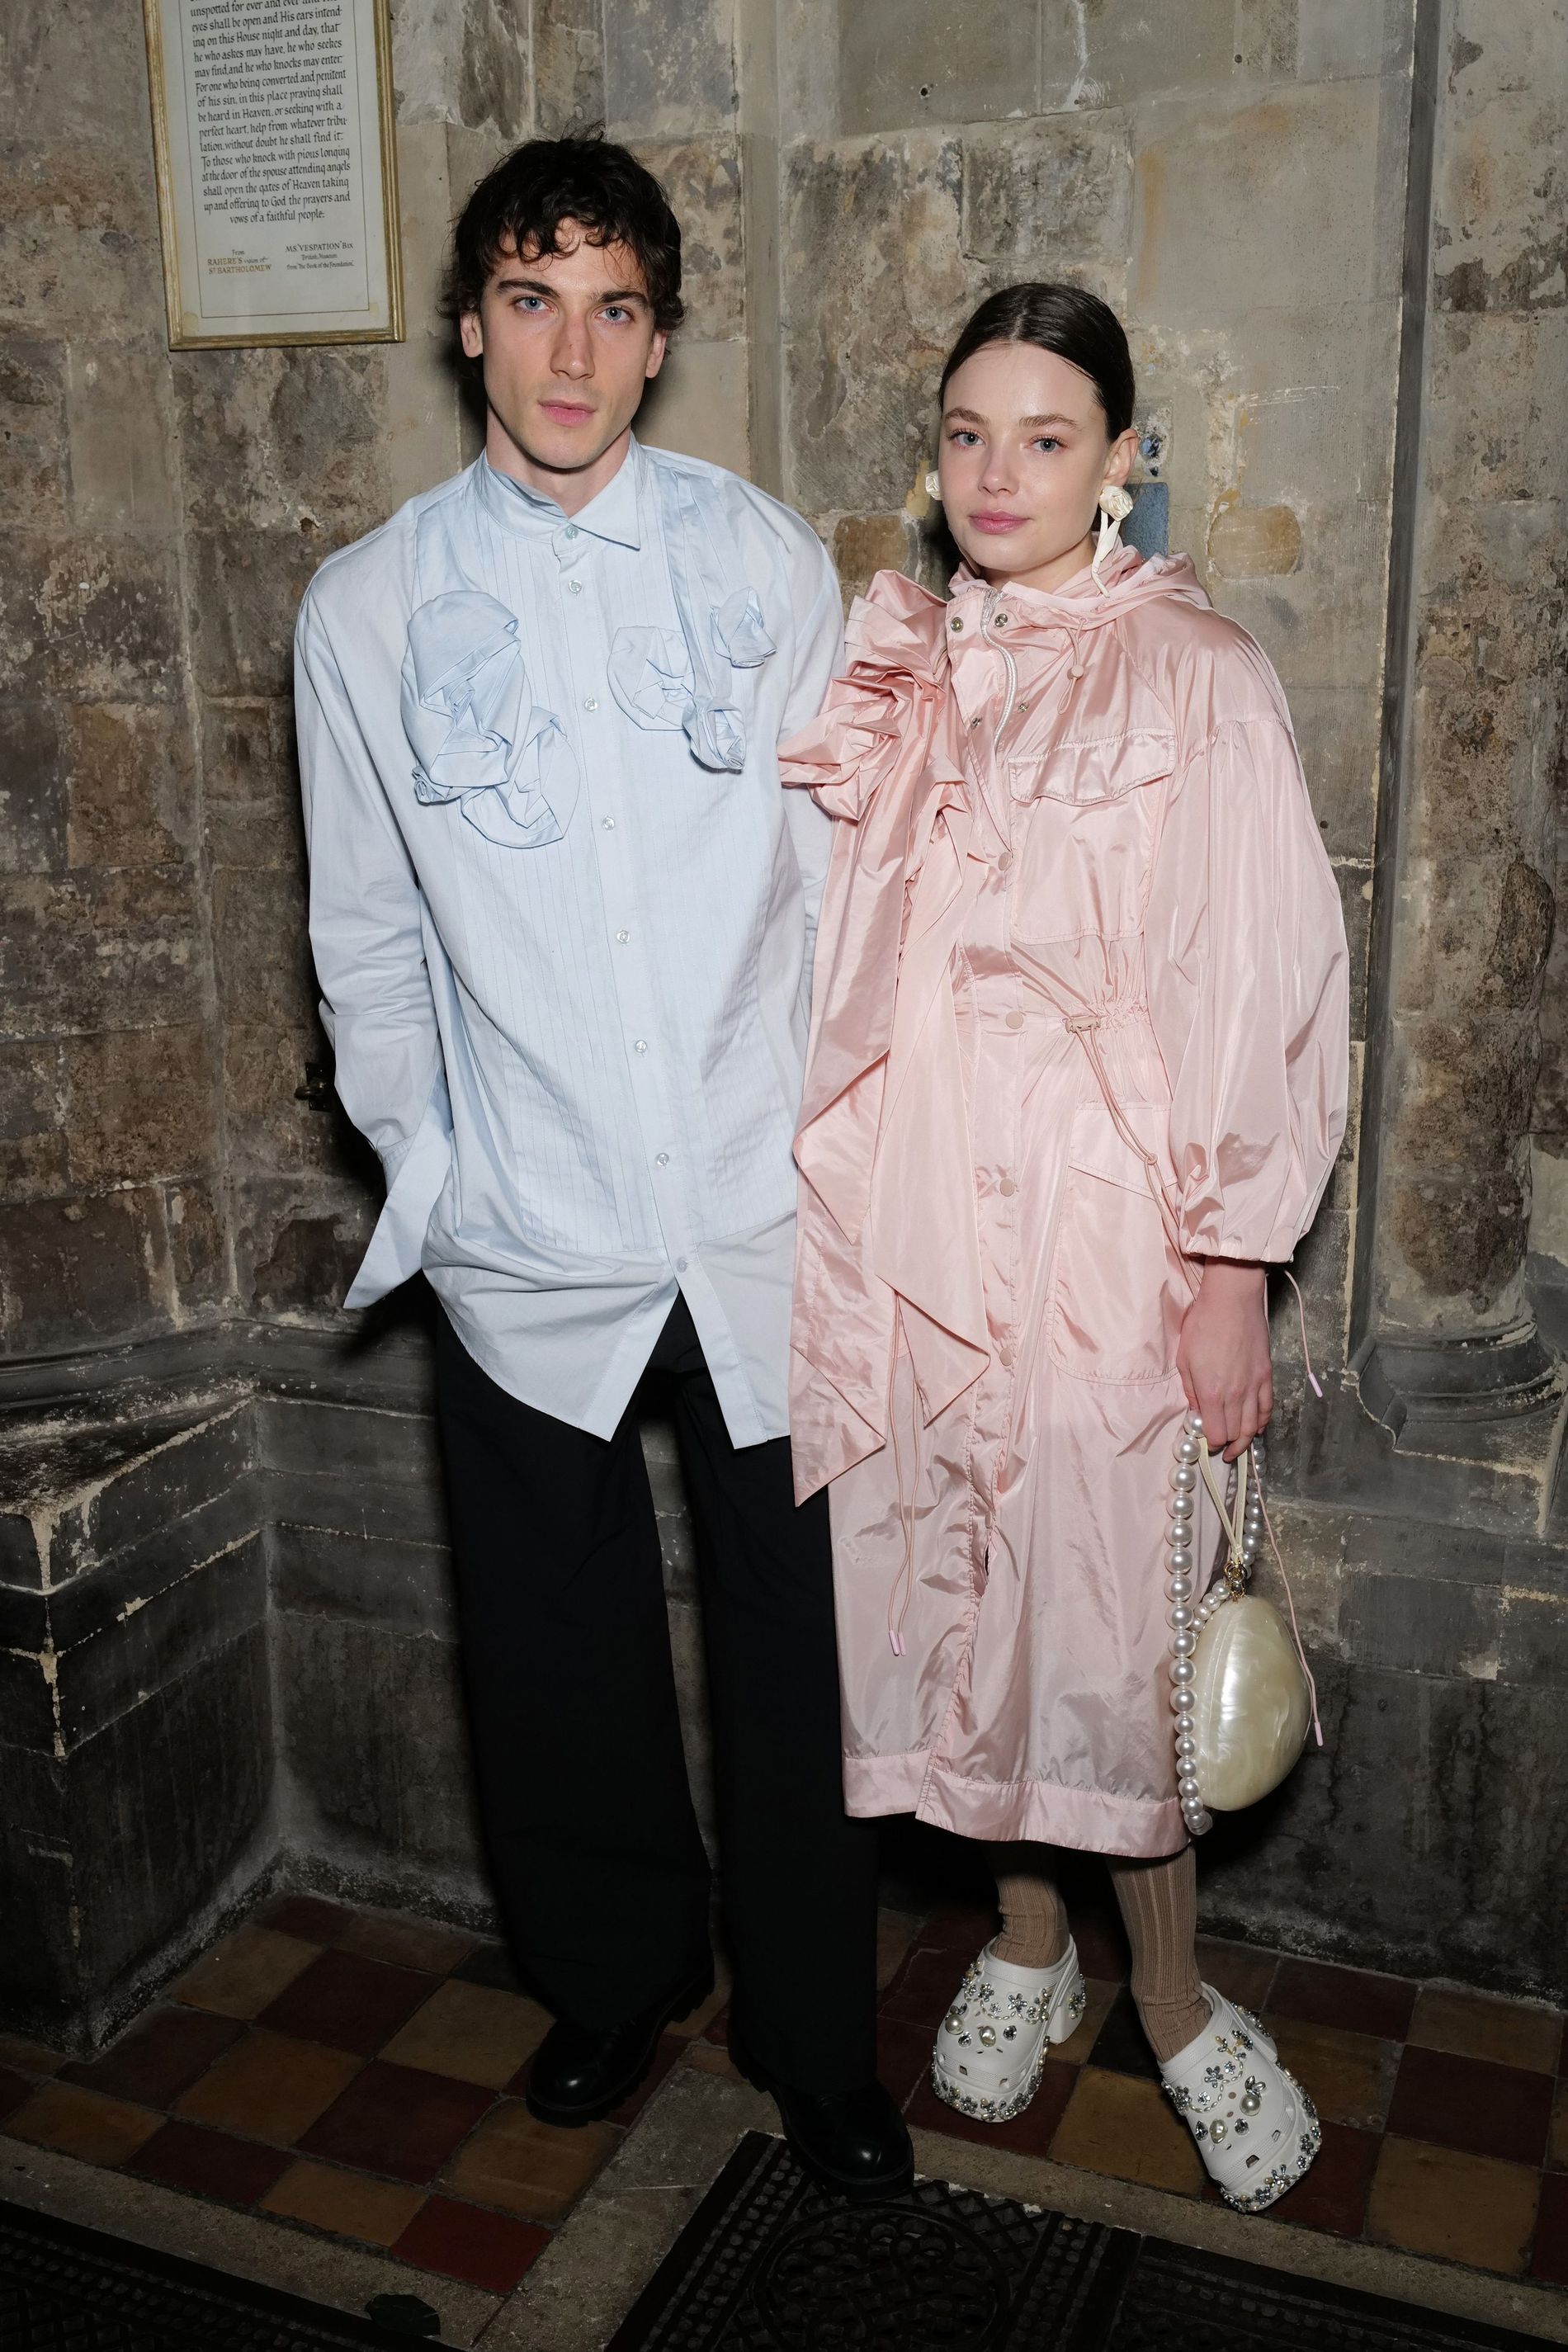 Kristine Frøseth wearing a pink bow-adorned coat and embellished crocs posing with Buccaneers co-star Guy Remmers